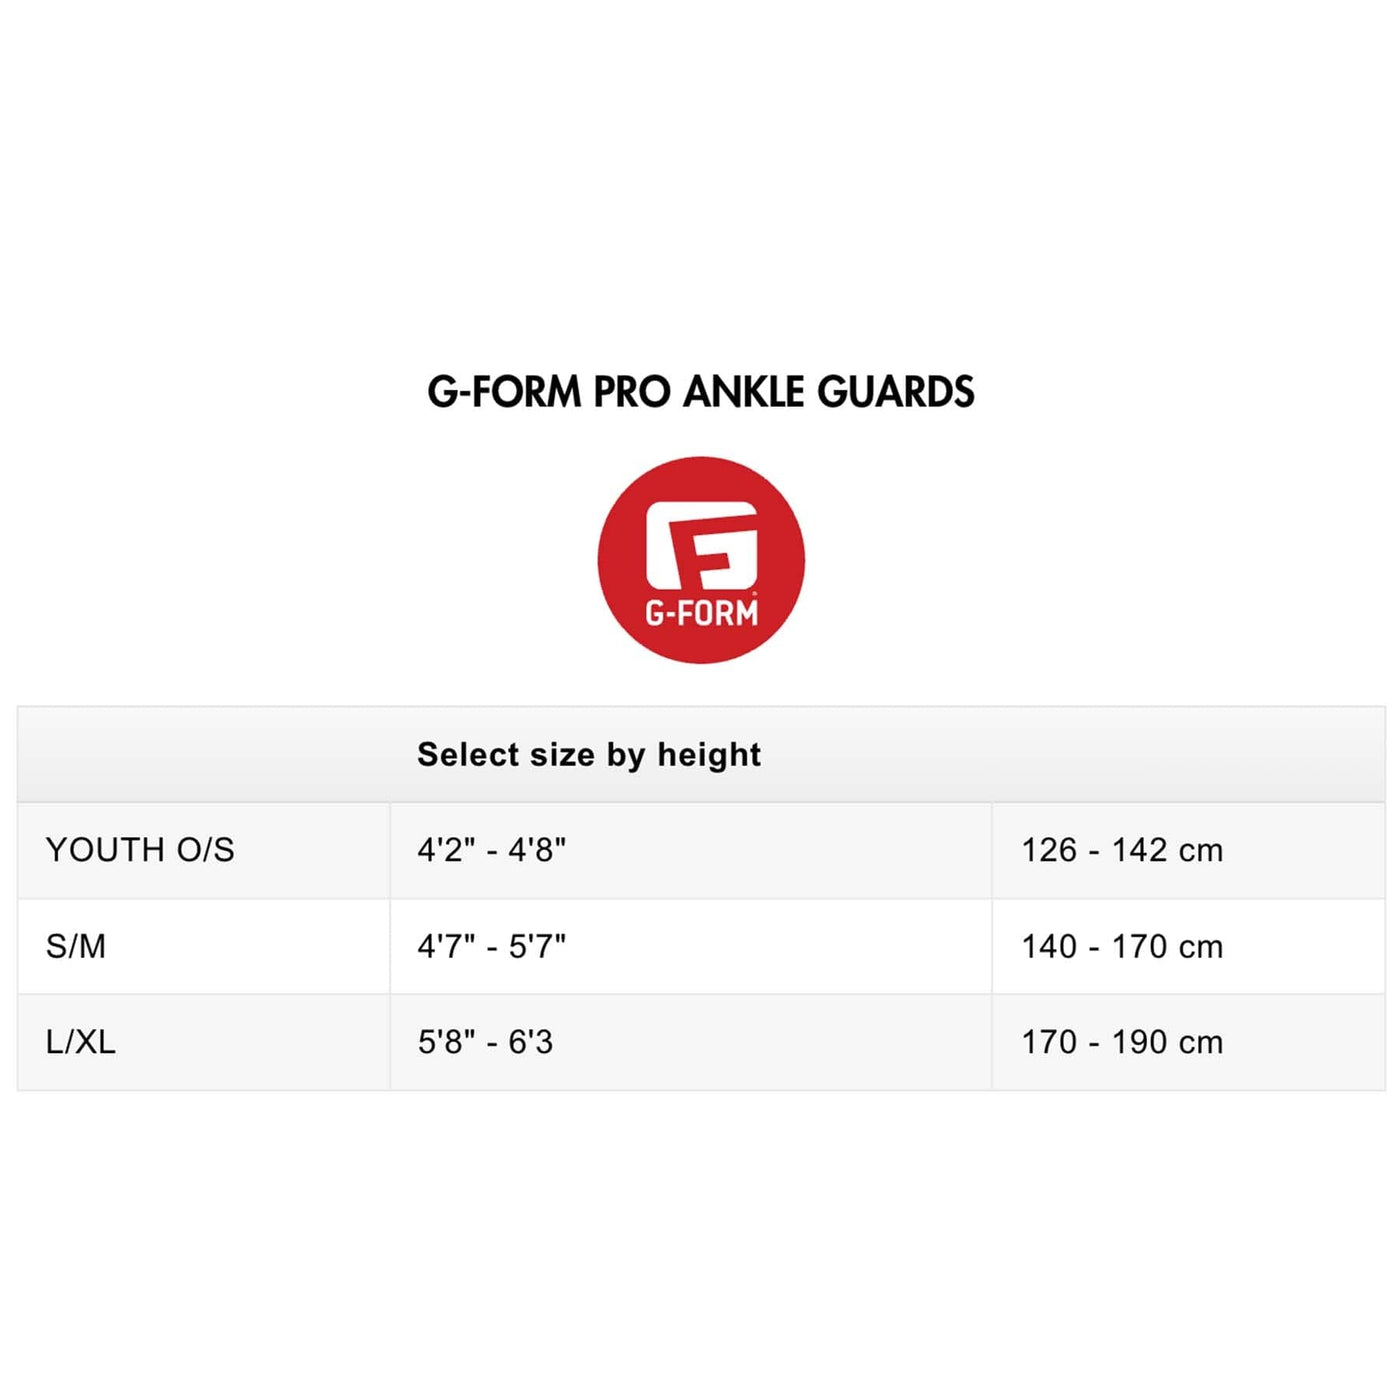 G-FORM PRO ANKLE GUARDS SIZE CHART